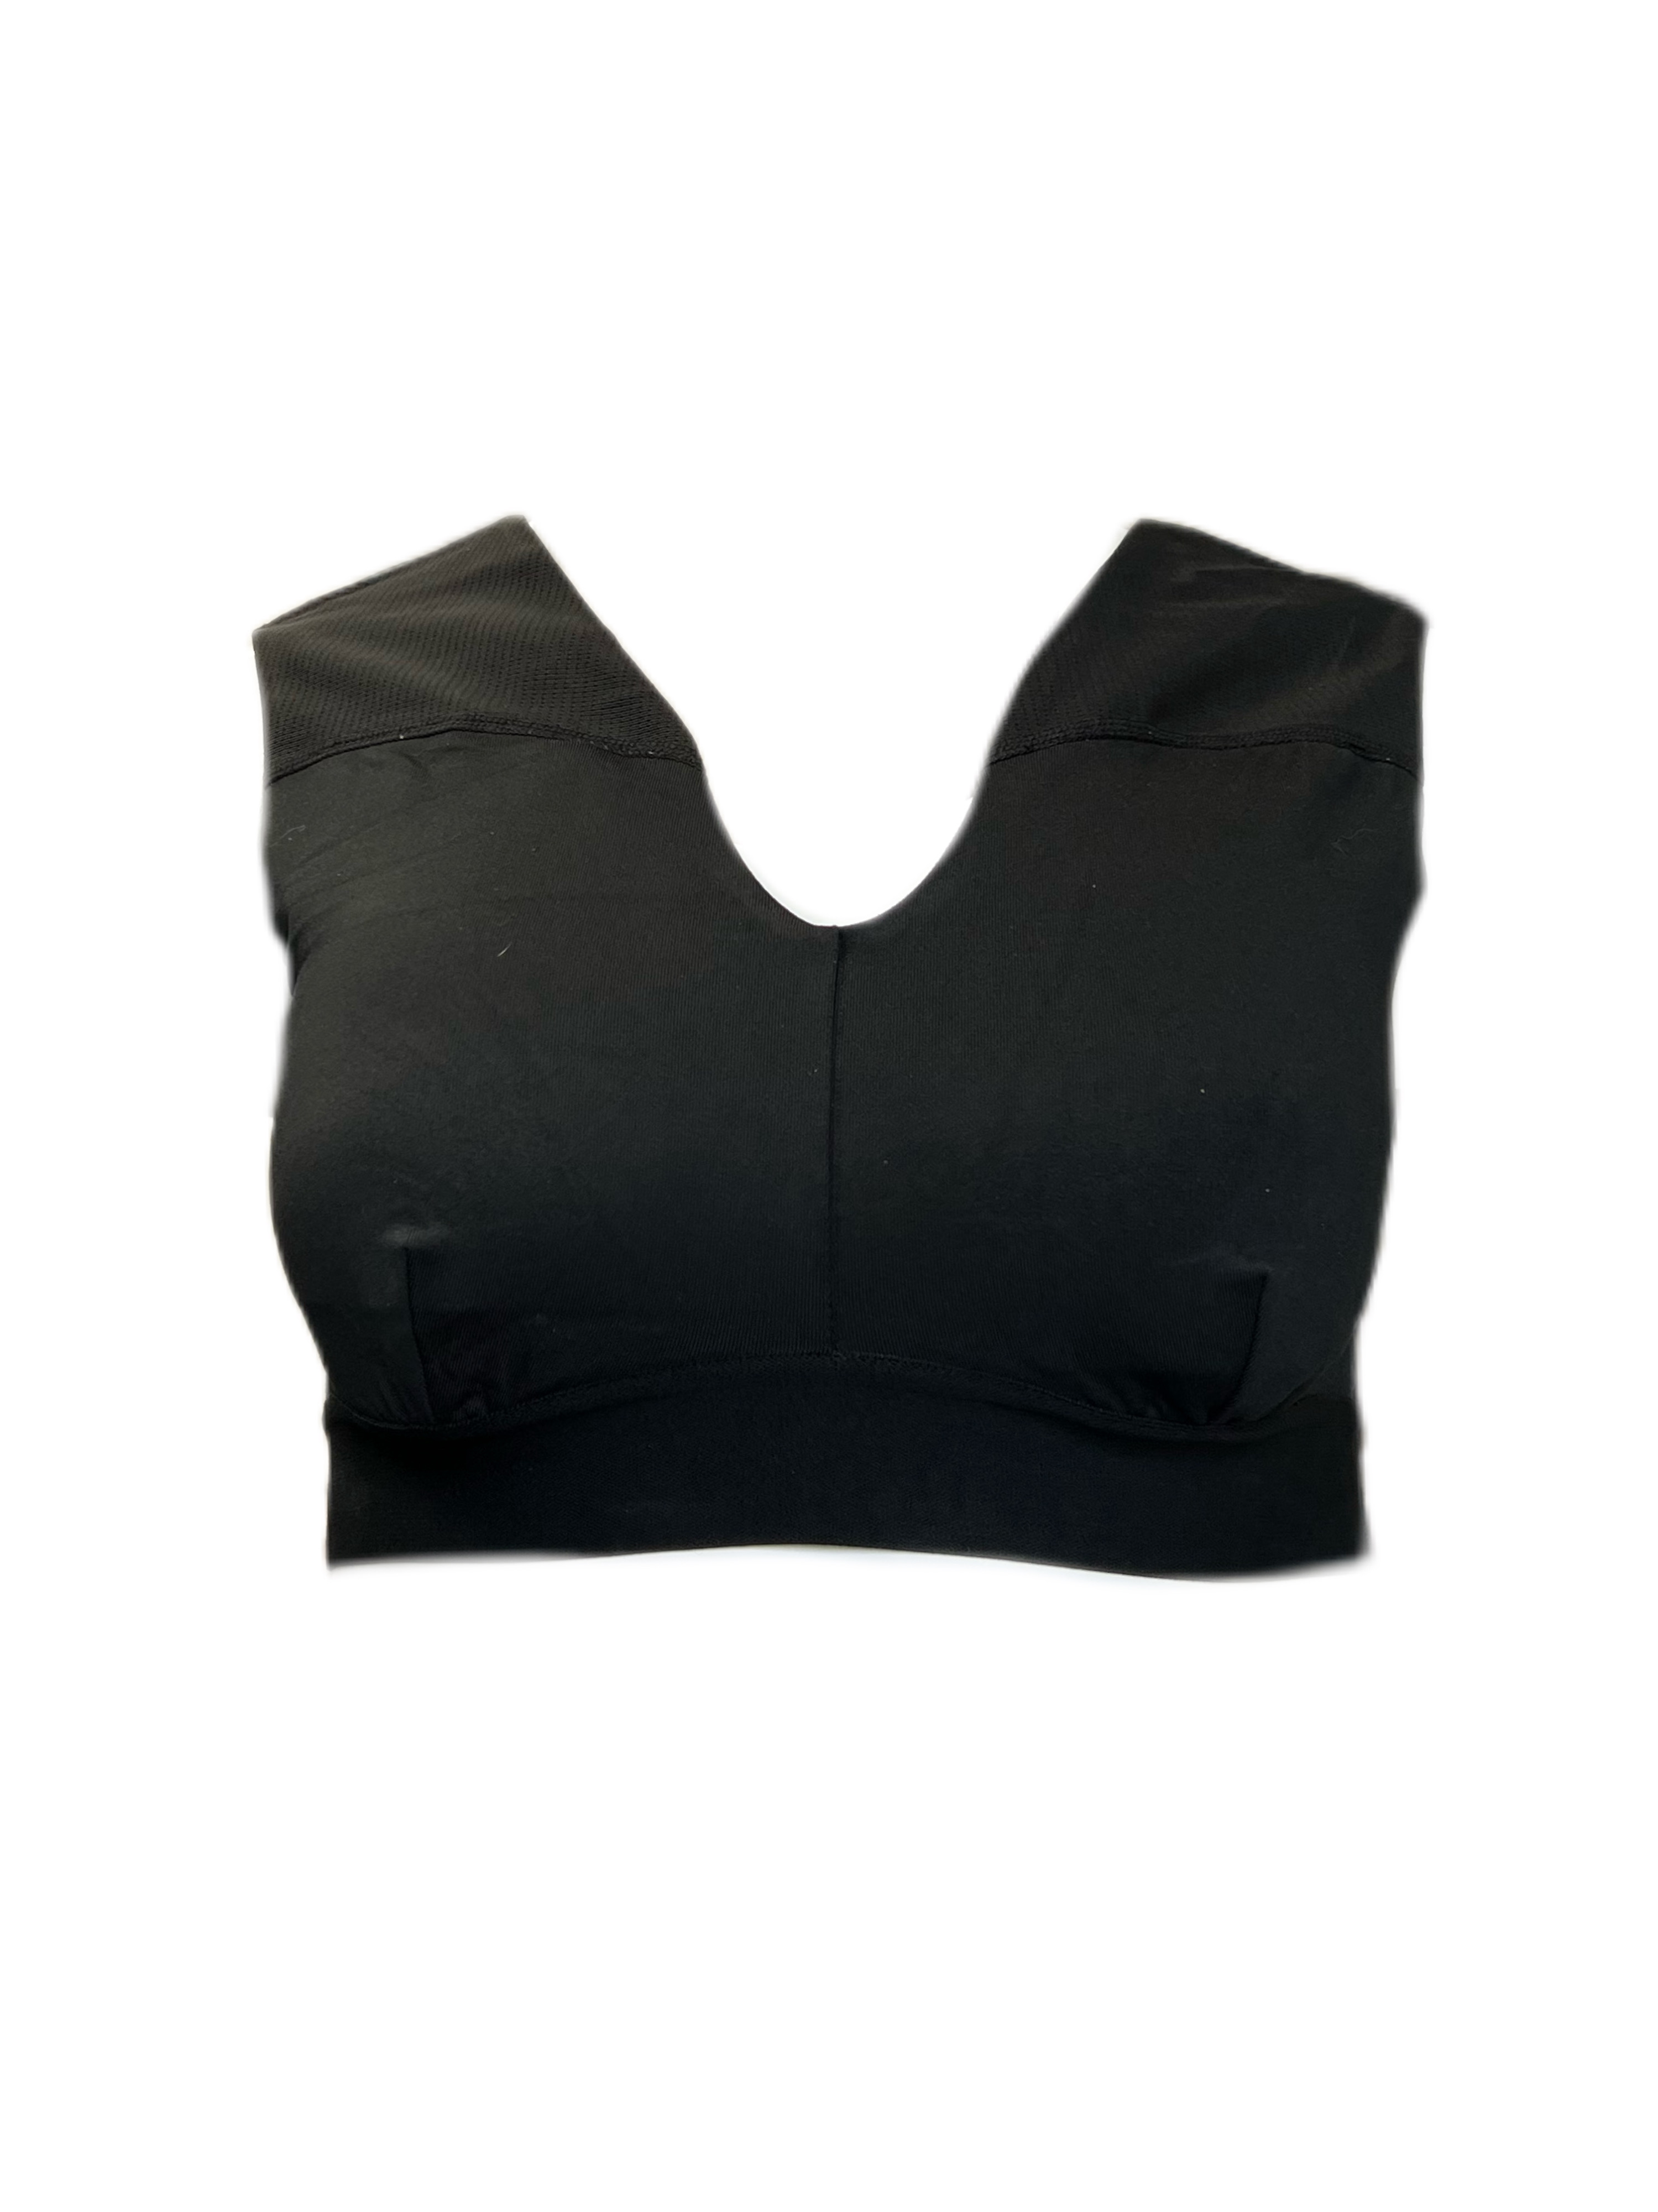 Tommie Copper Shoulder Support Bra, Posture Corrector Bra for Women, Bra  with Back Support, Posture Bra and Compression Bra for Women, Back and  Shoulder Support Bra, Black S : Clothing, Shoes & Jewelry 